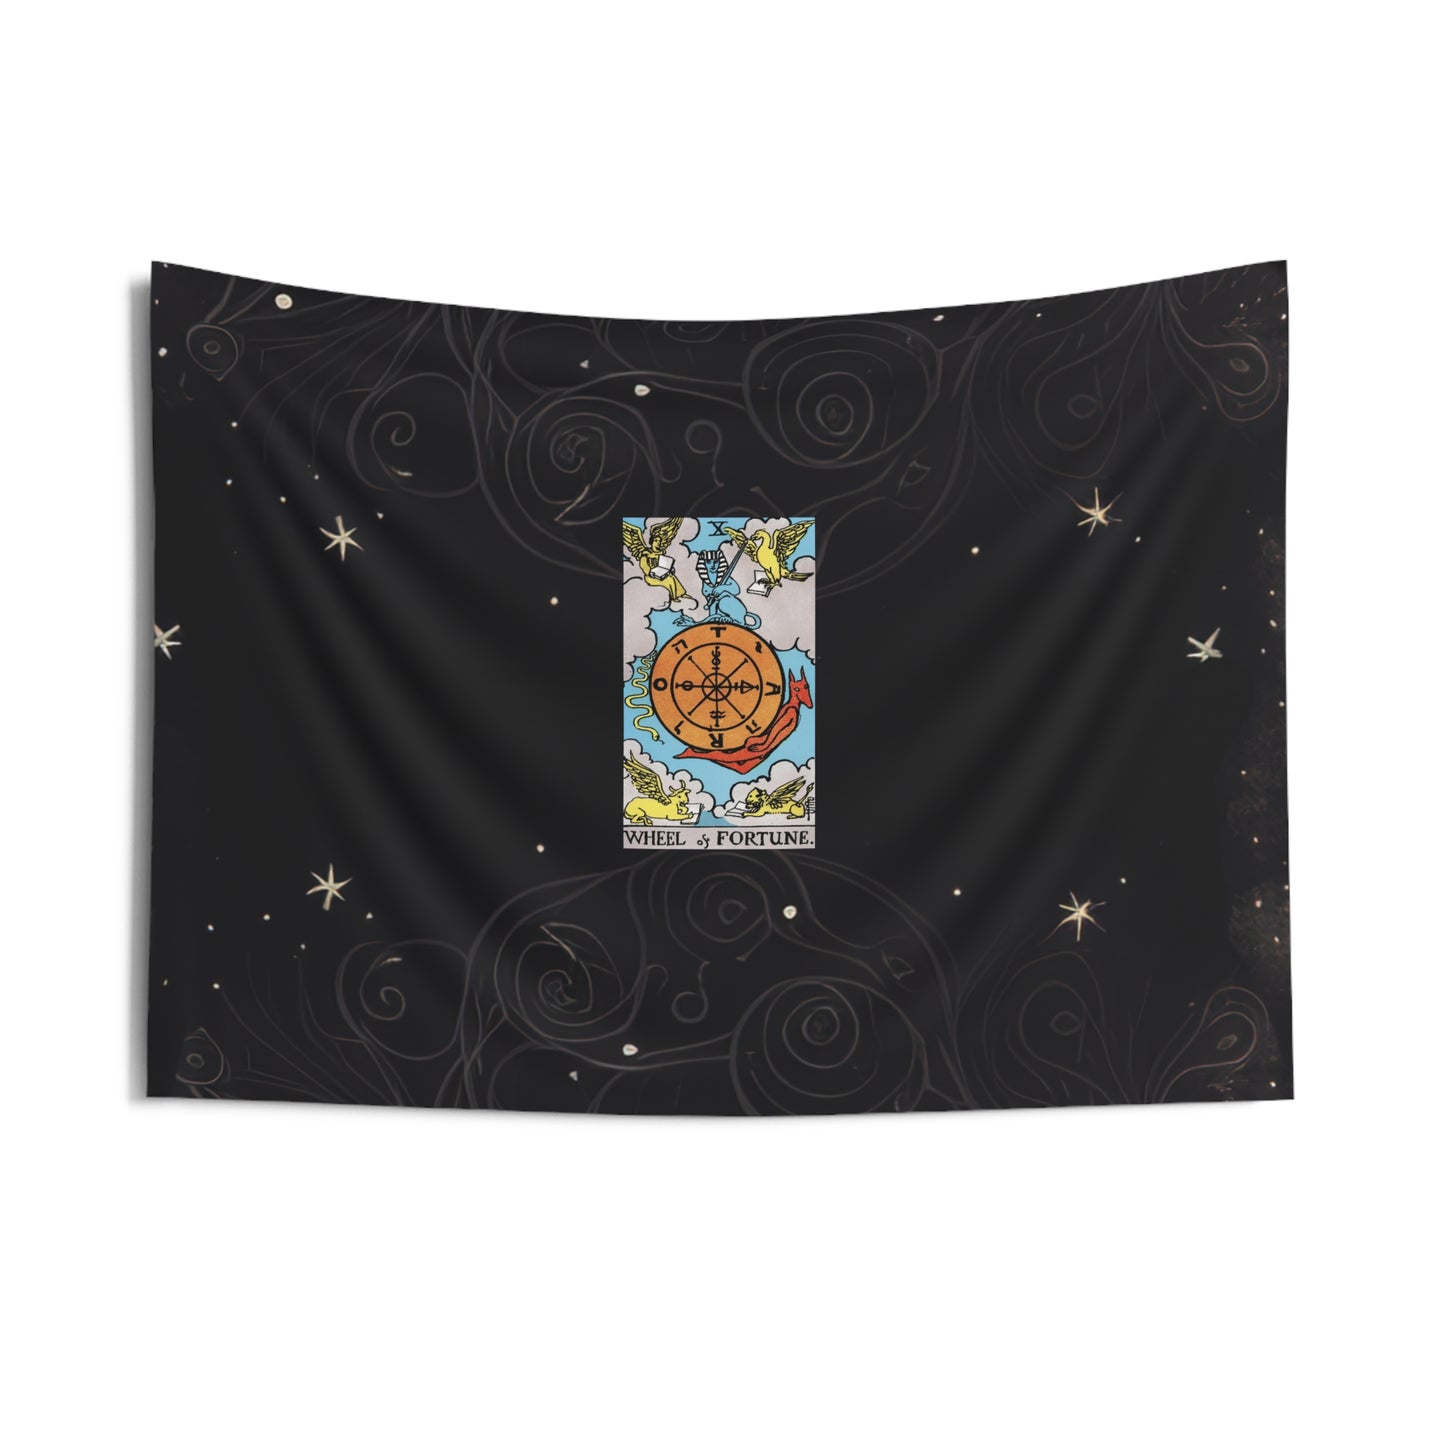 The Wheel of Fortune Tarot Card Altar Cloth or Tapestry with Starry Background